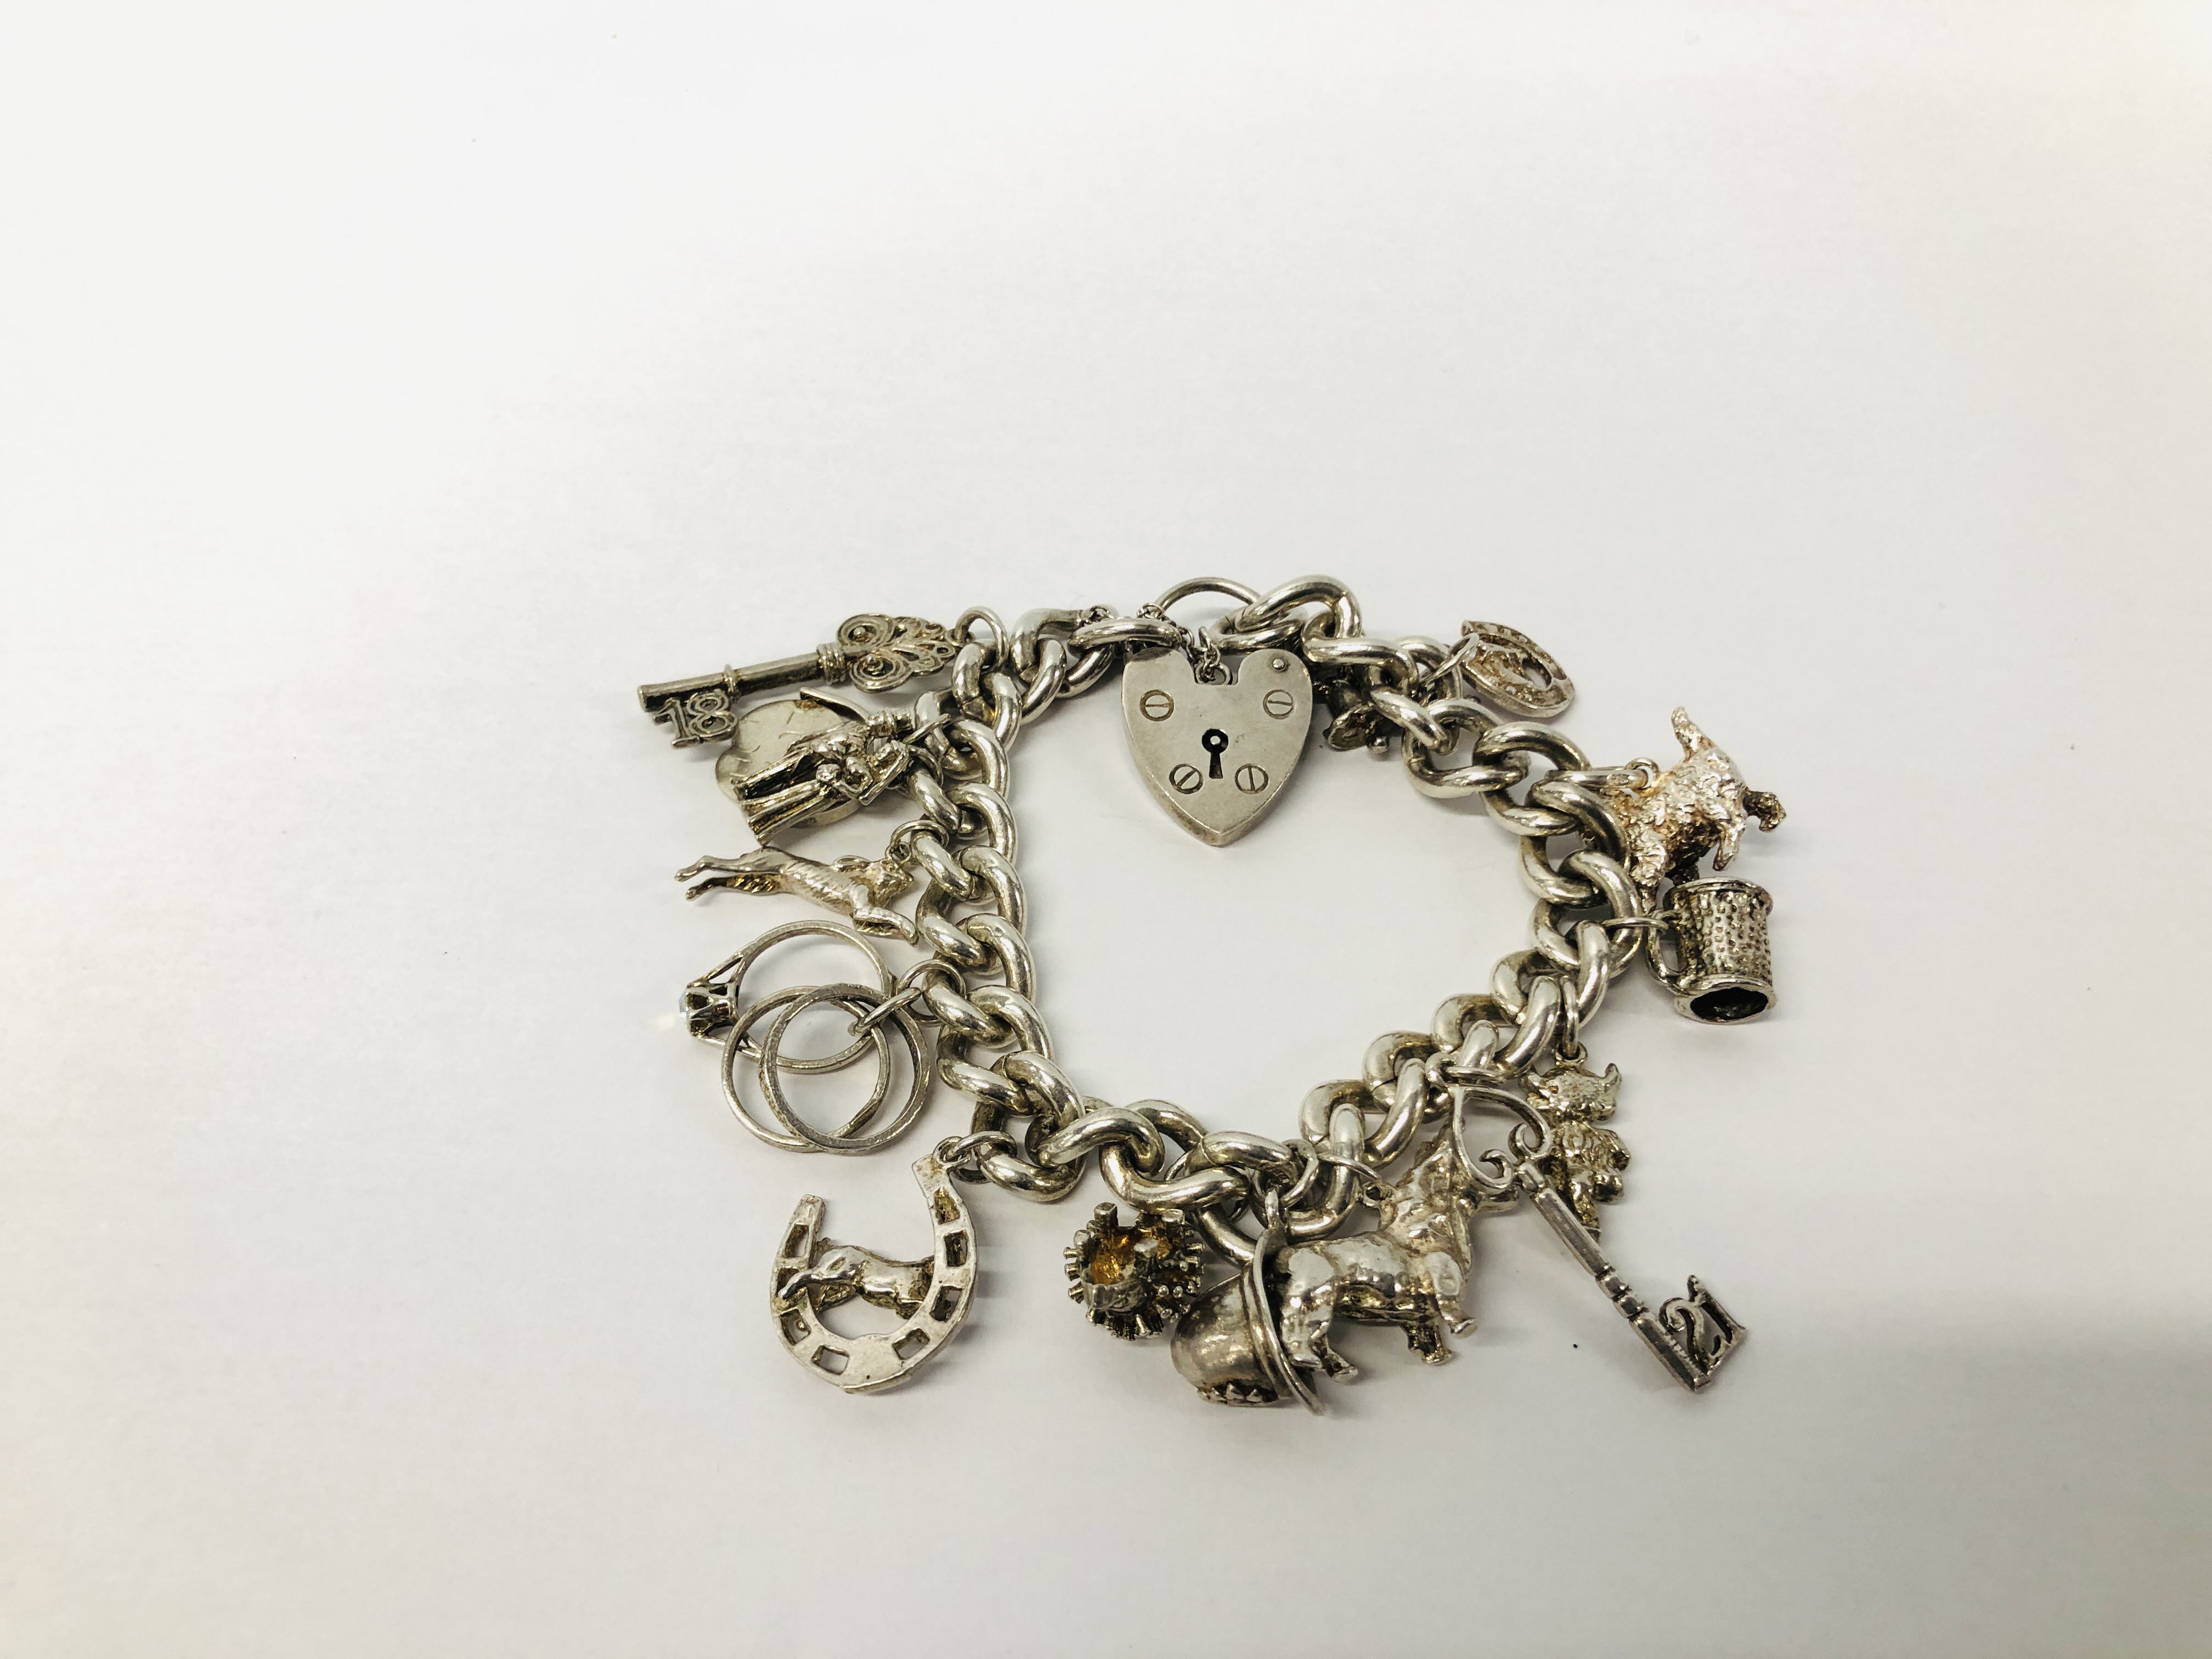 SILVER CHARM BRACELET (15 CHARMS ATTACHED) - Image 2 of 8